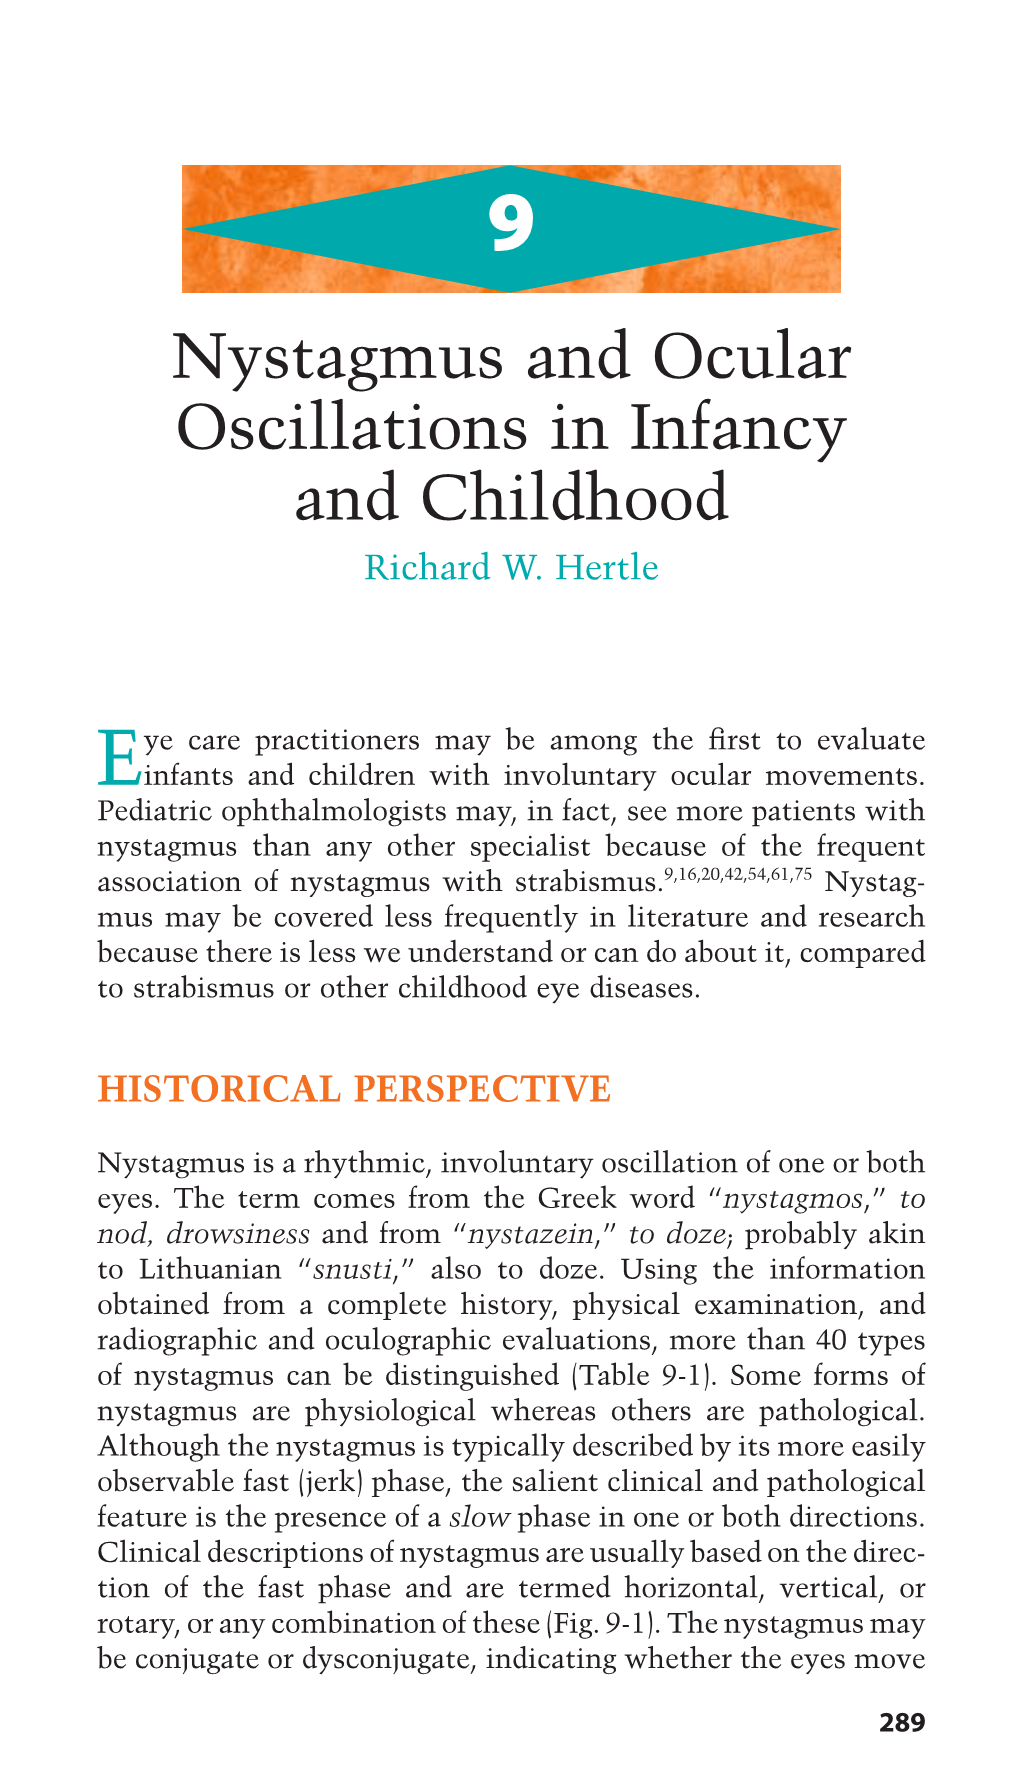 Nystagmus and Ocular Oscillations in Infancy and Childhood Richard W